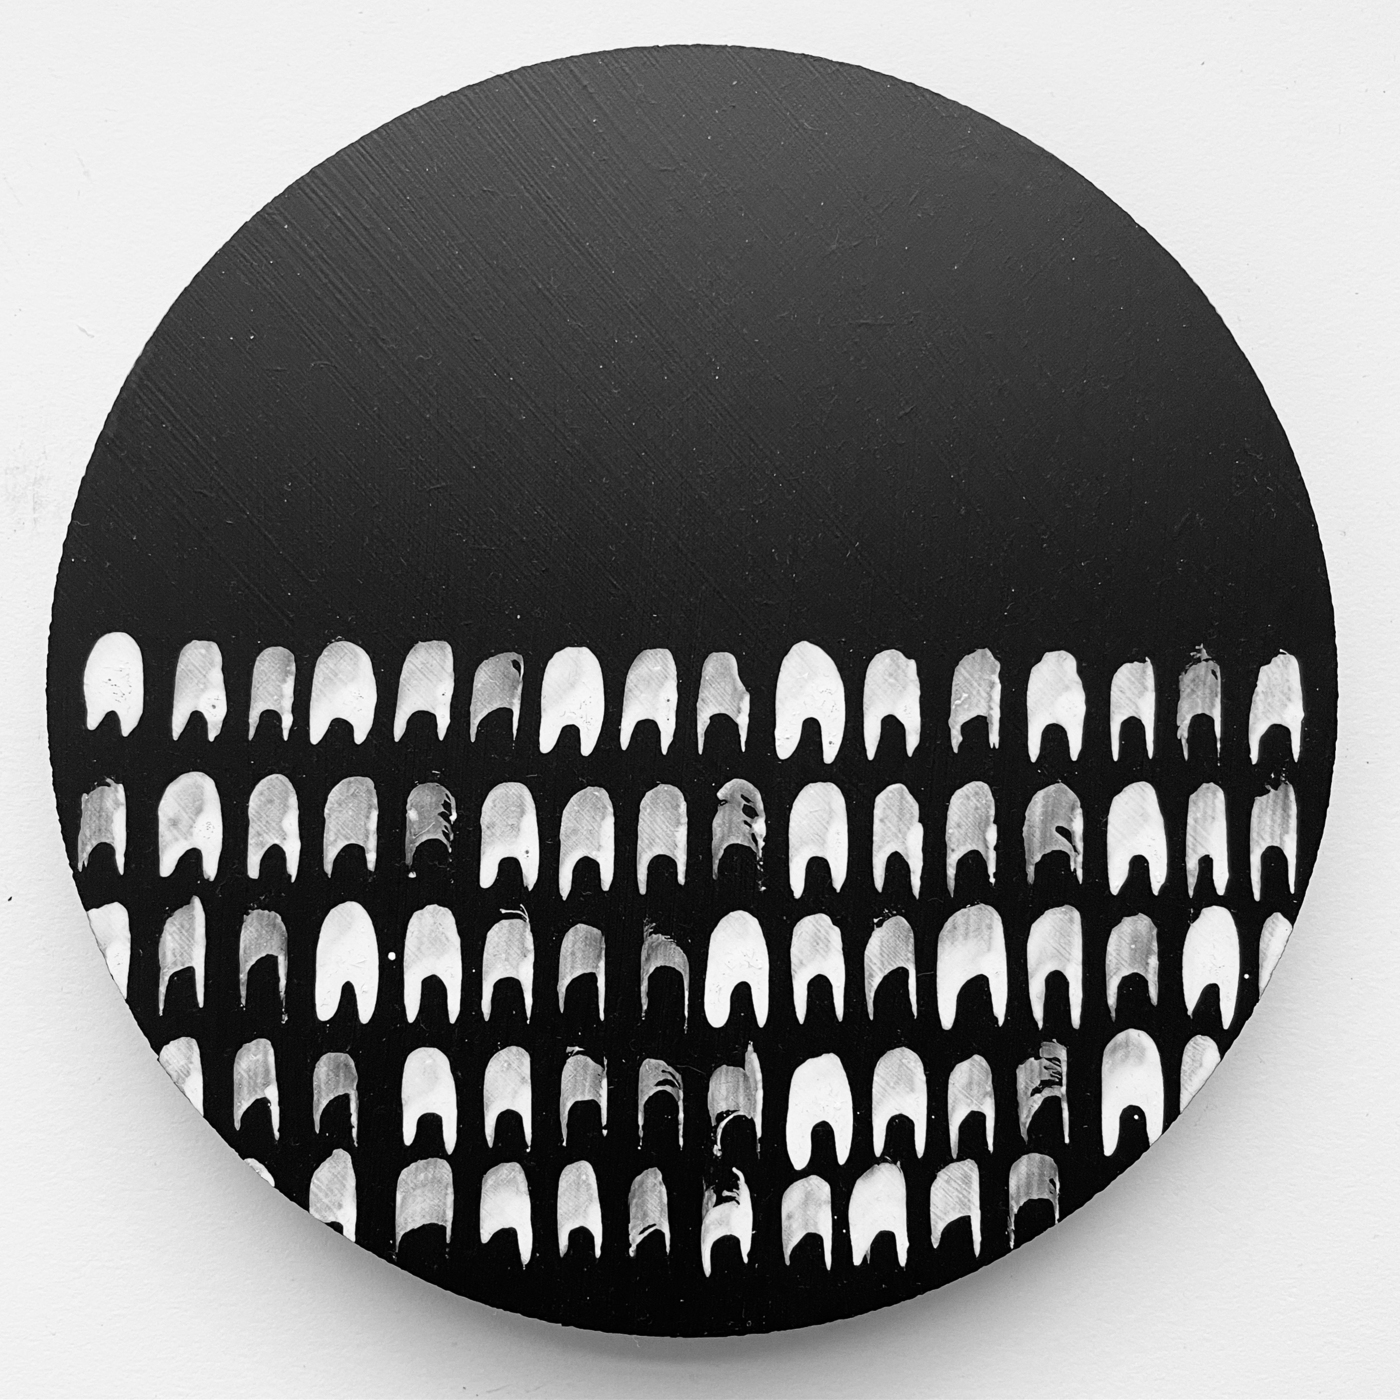 Rondo series drawing six inch MDF round, black background with ink marks